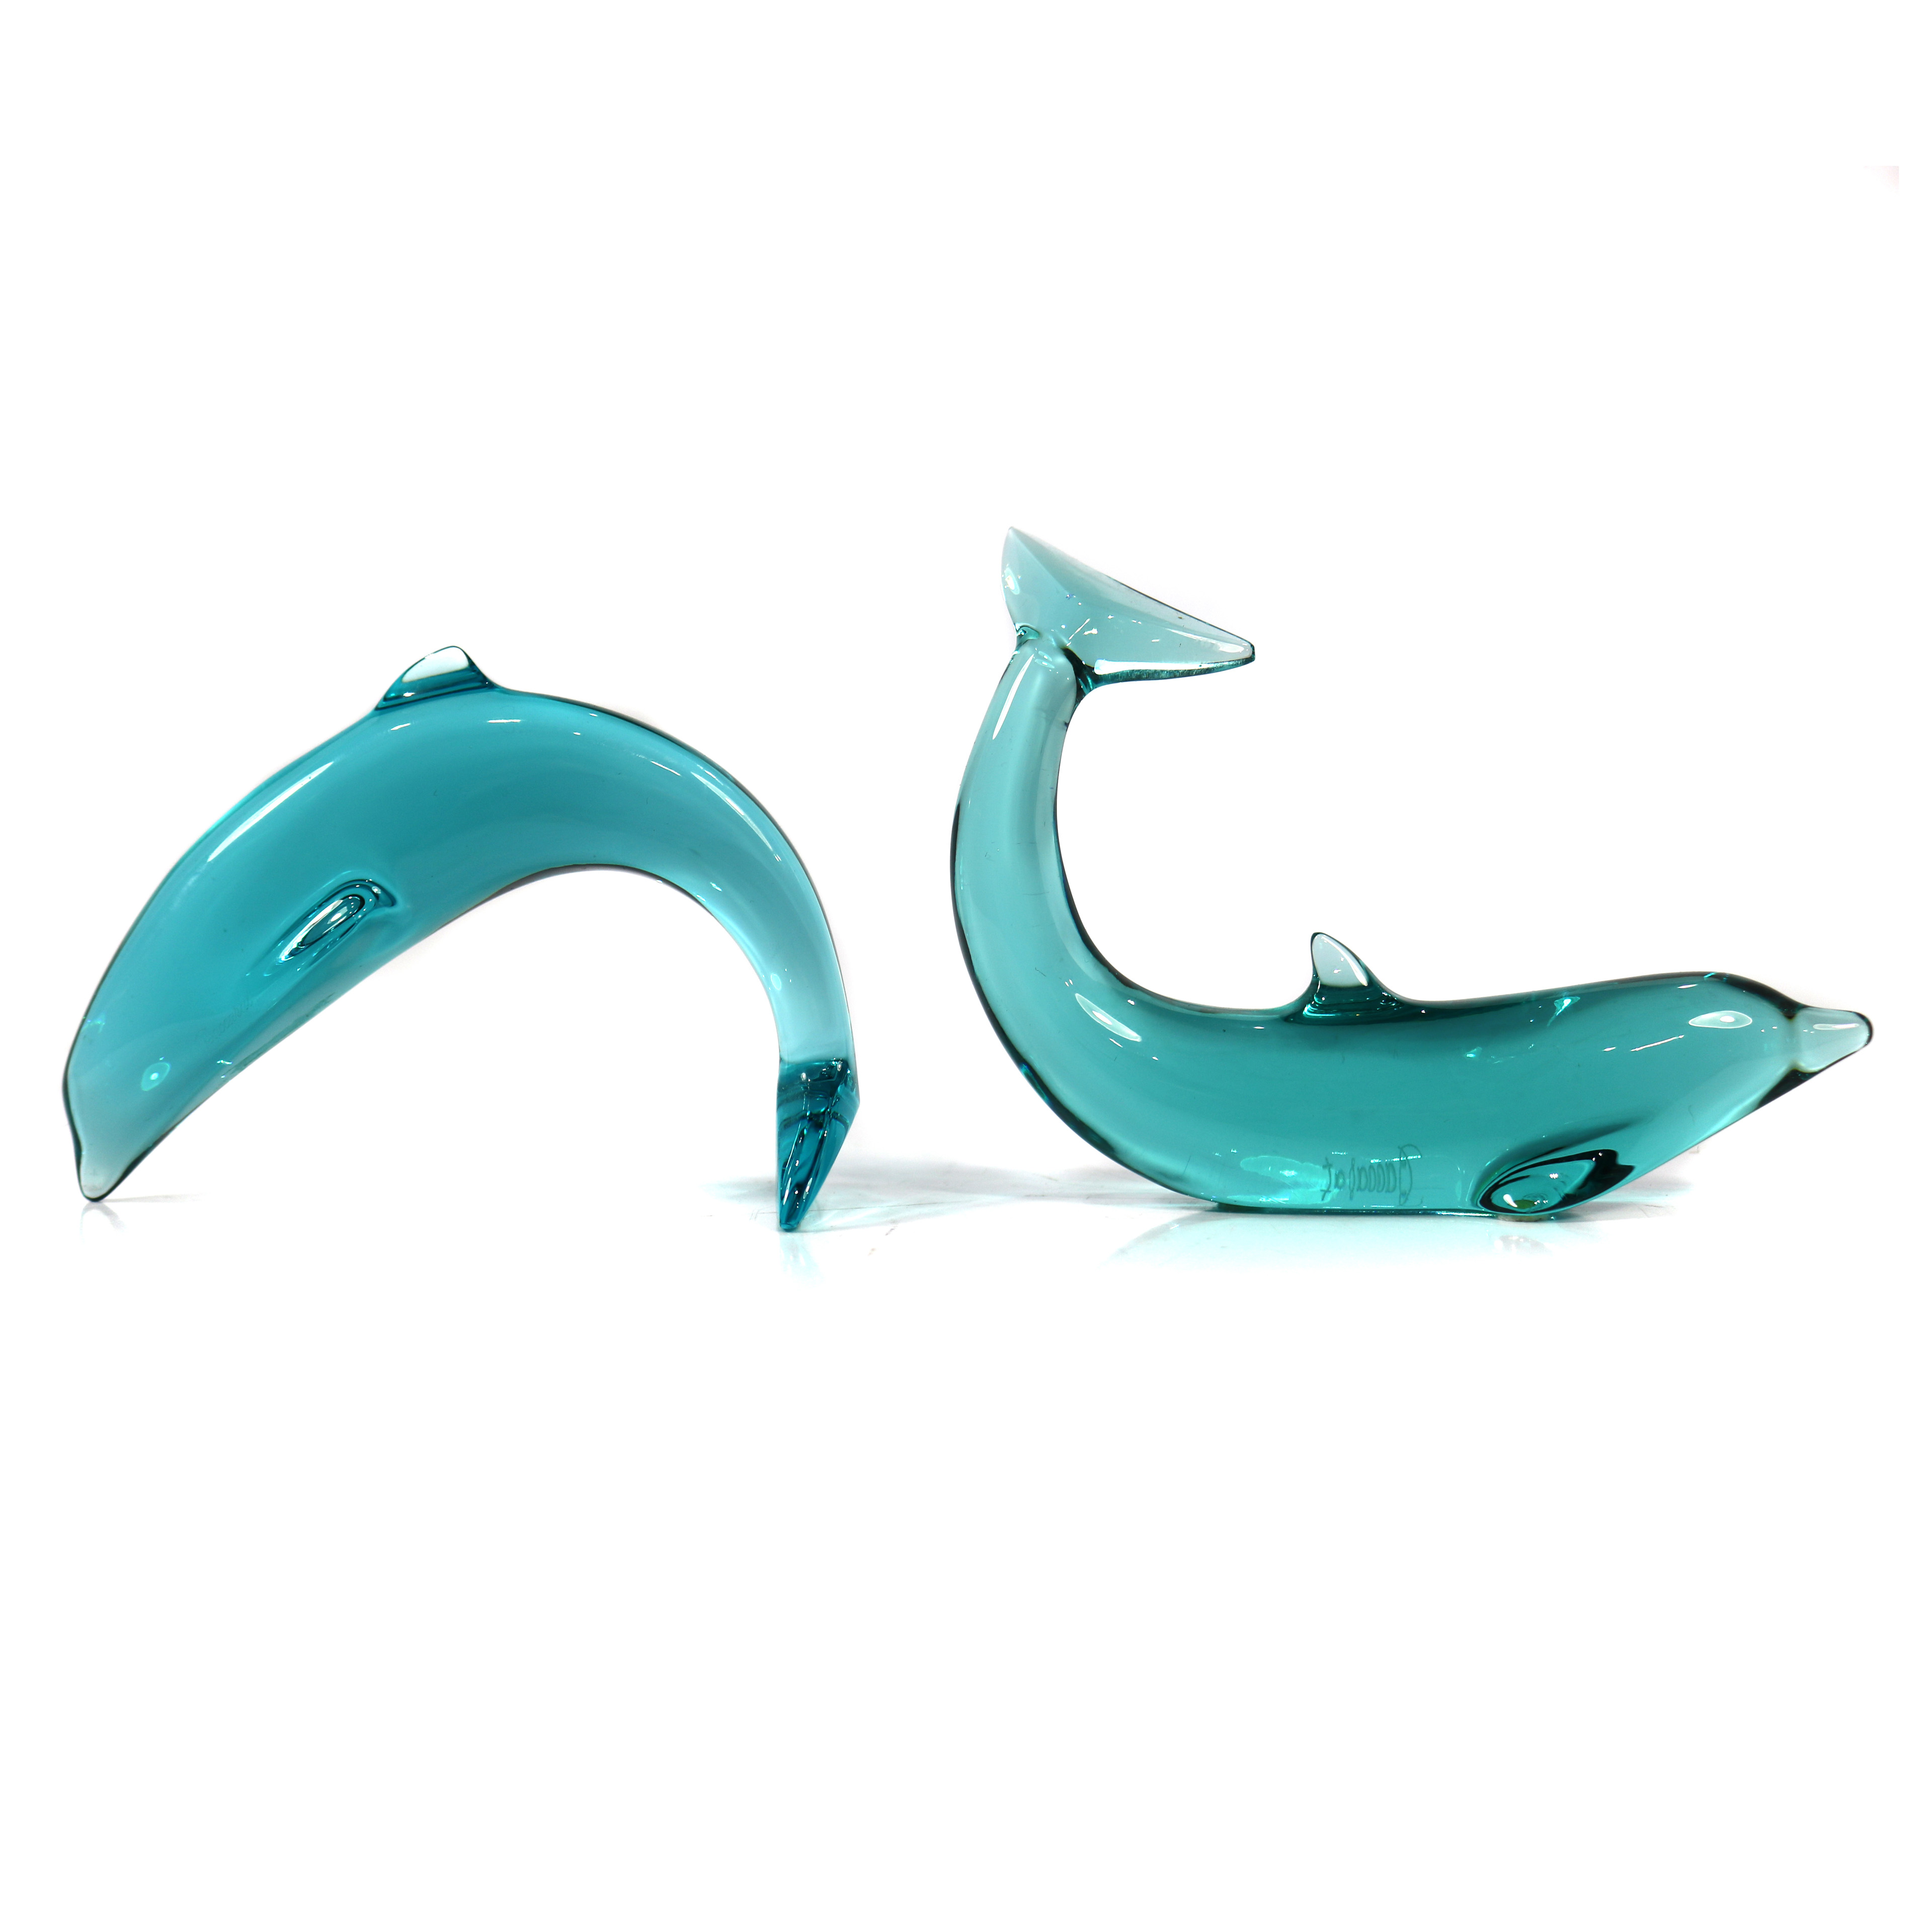 A PAIR OF BACCARAT DOLPHINS A pair of